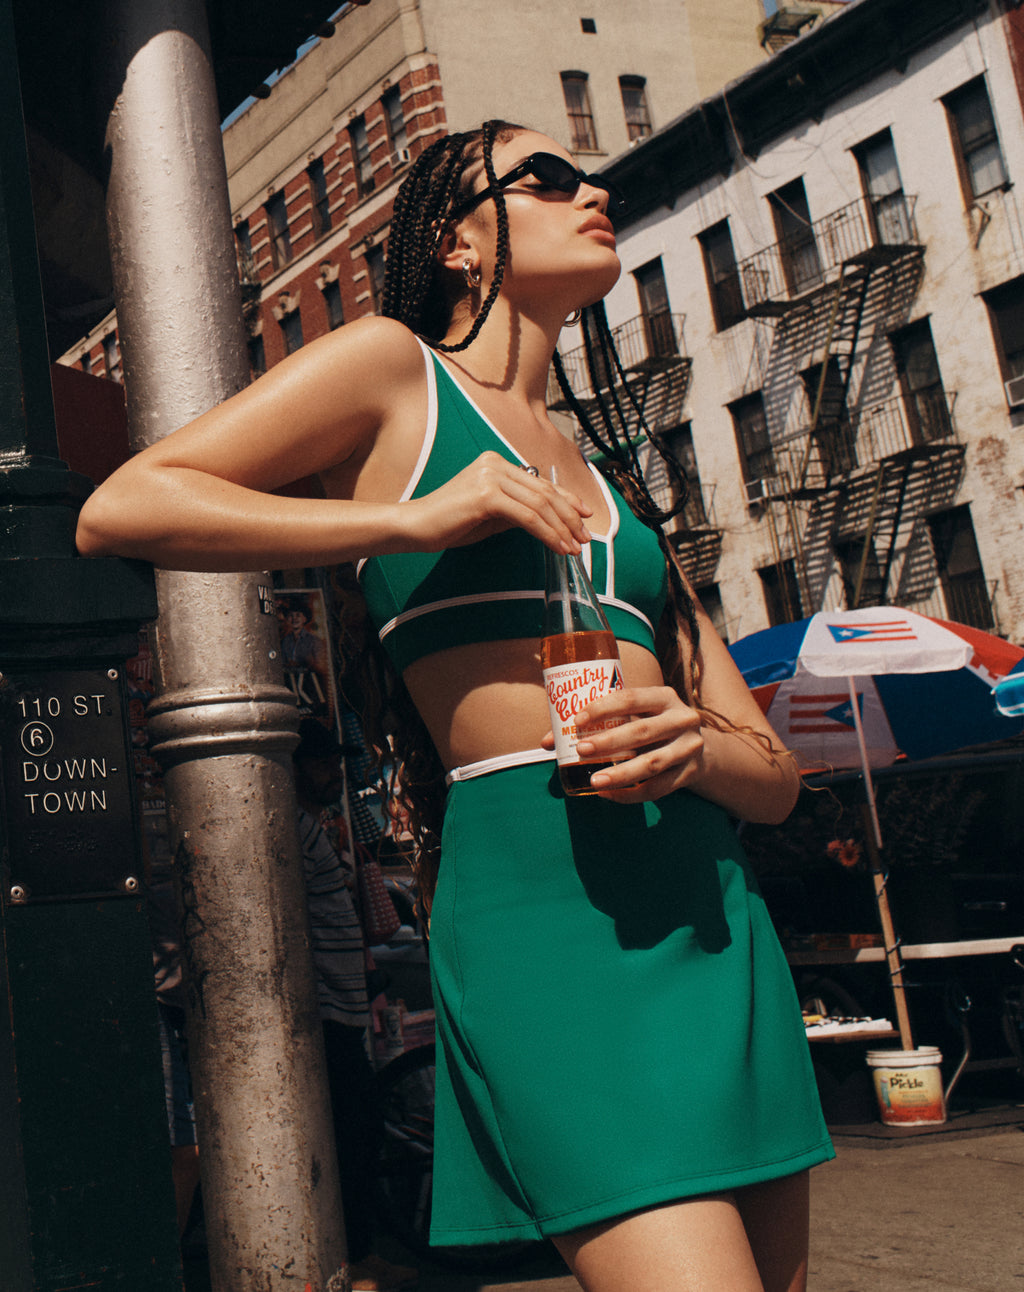 Model wearing a green sports bra and skirt from All Access drinking a soda while standing on the street in New York